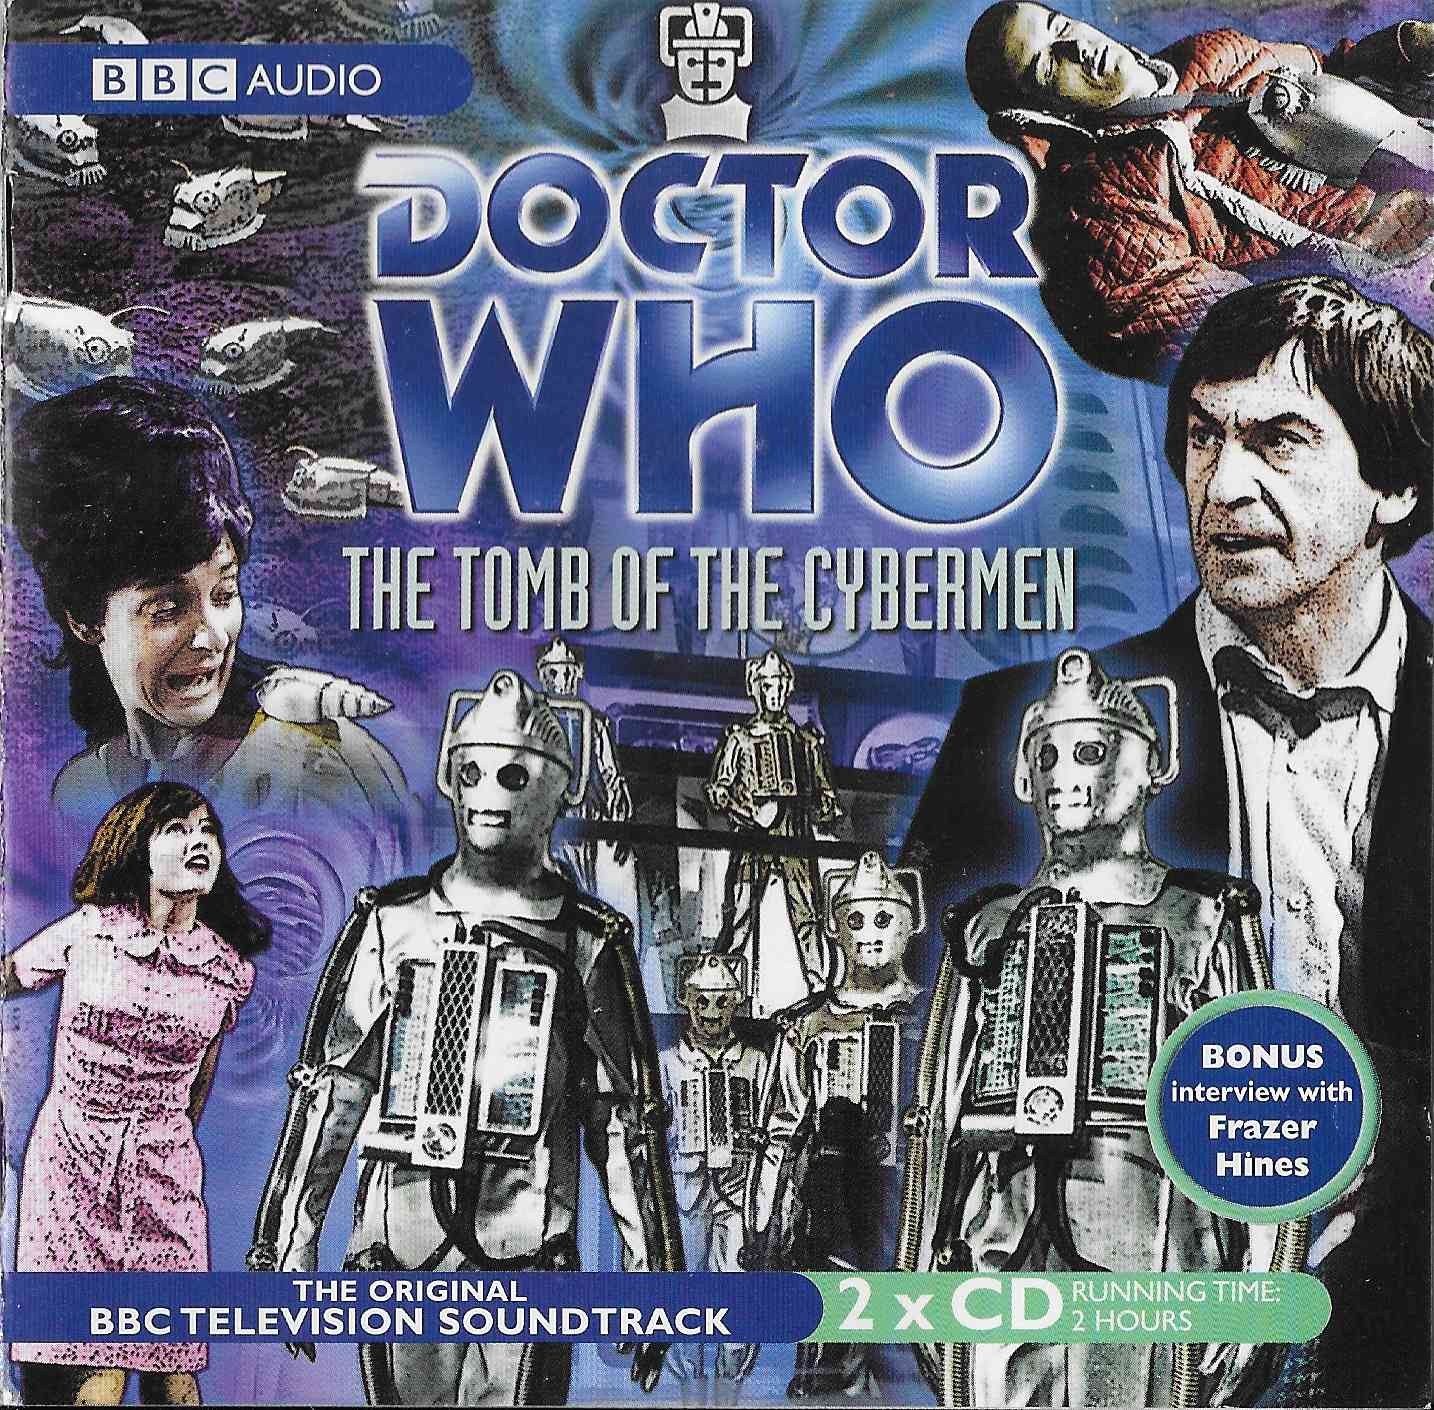 Picture of ISBN 1-856-07046-5 Doctor Who - The tomb of the Cybermen by artist Kit Peddler / Gerry Davis from the BBC cds - Records and Tapes library